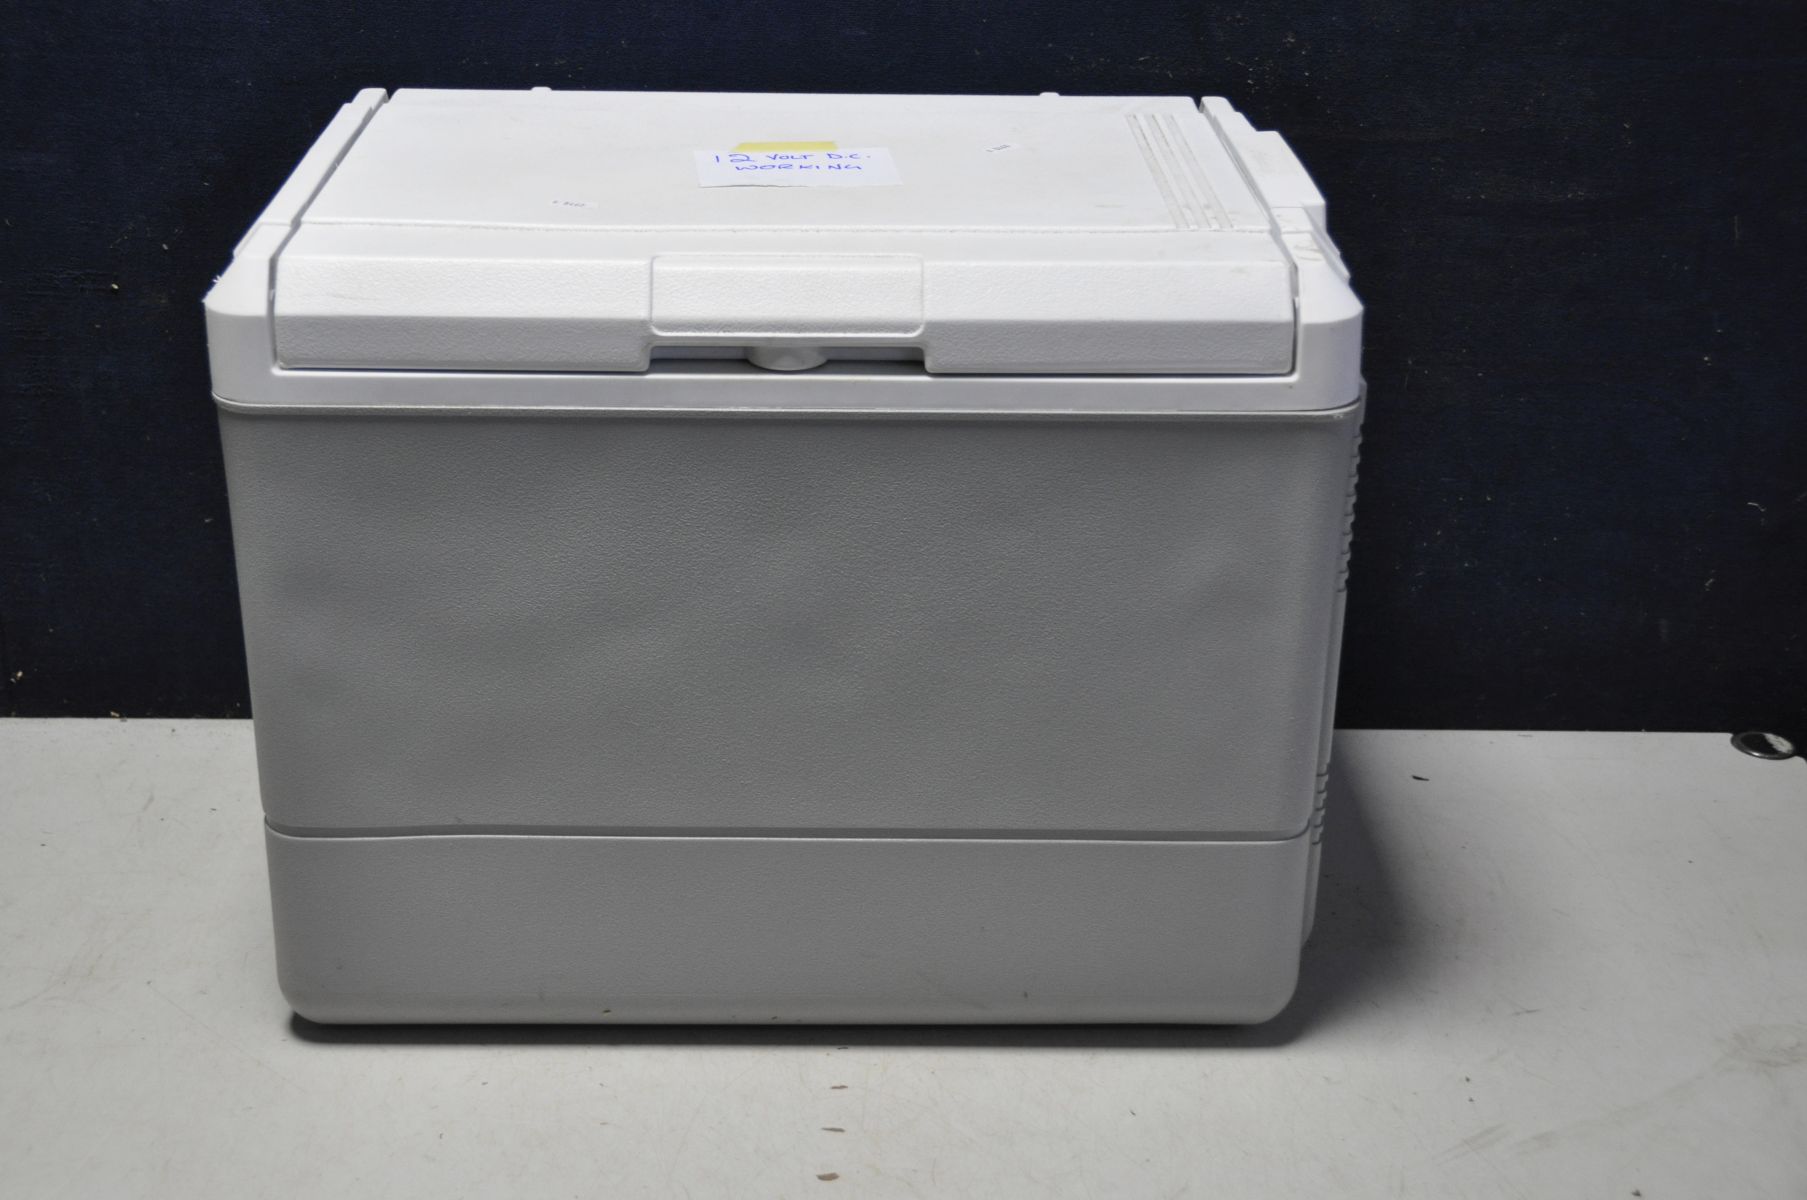 A COLEMAN COOLER model No 5640 portable cooler (untested due to no power mains)